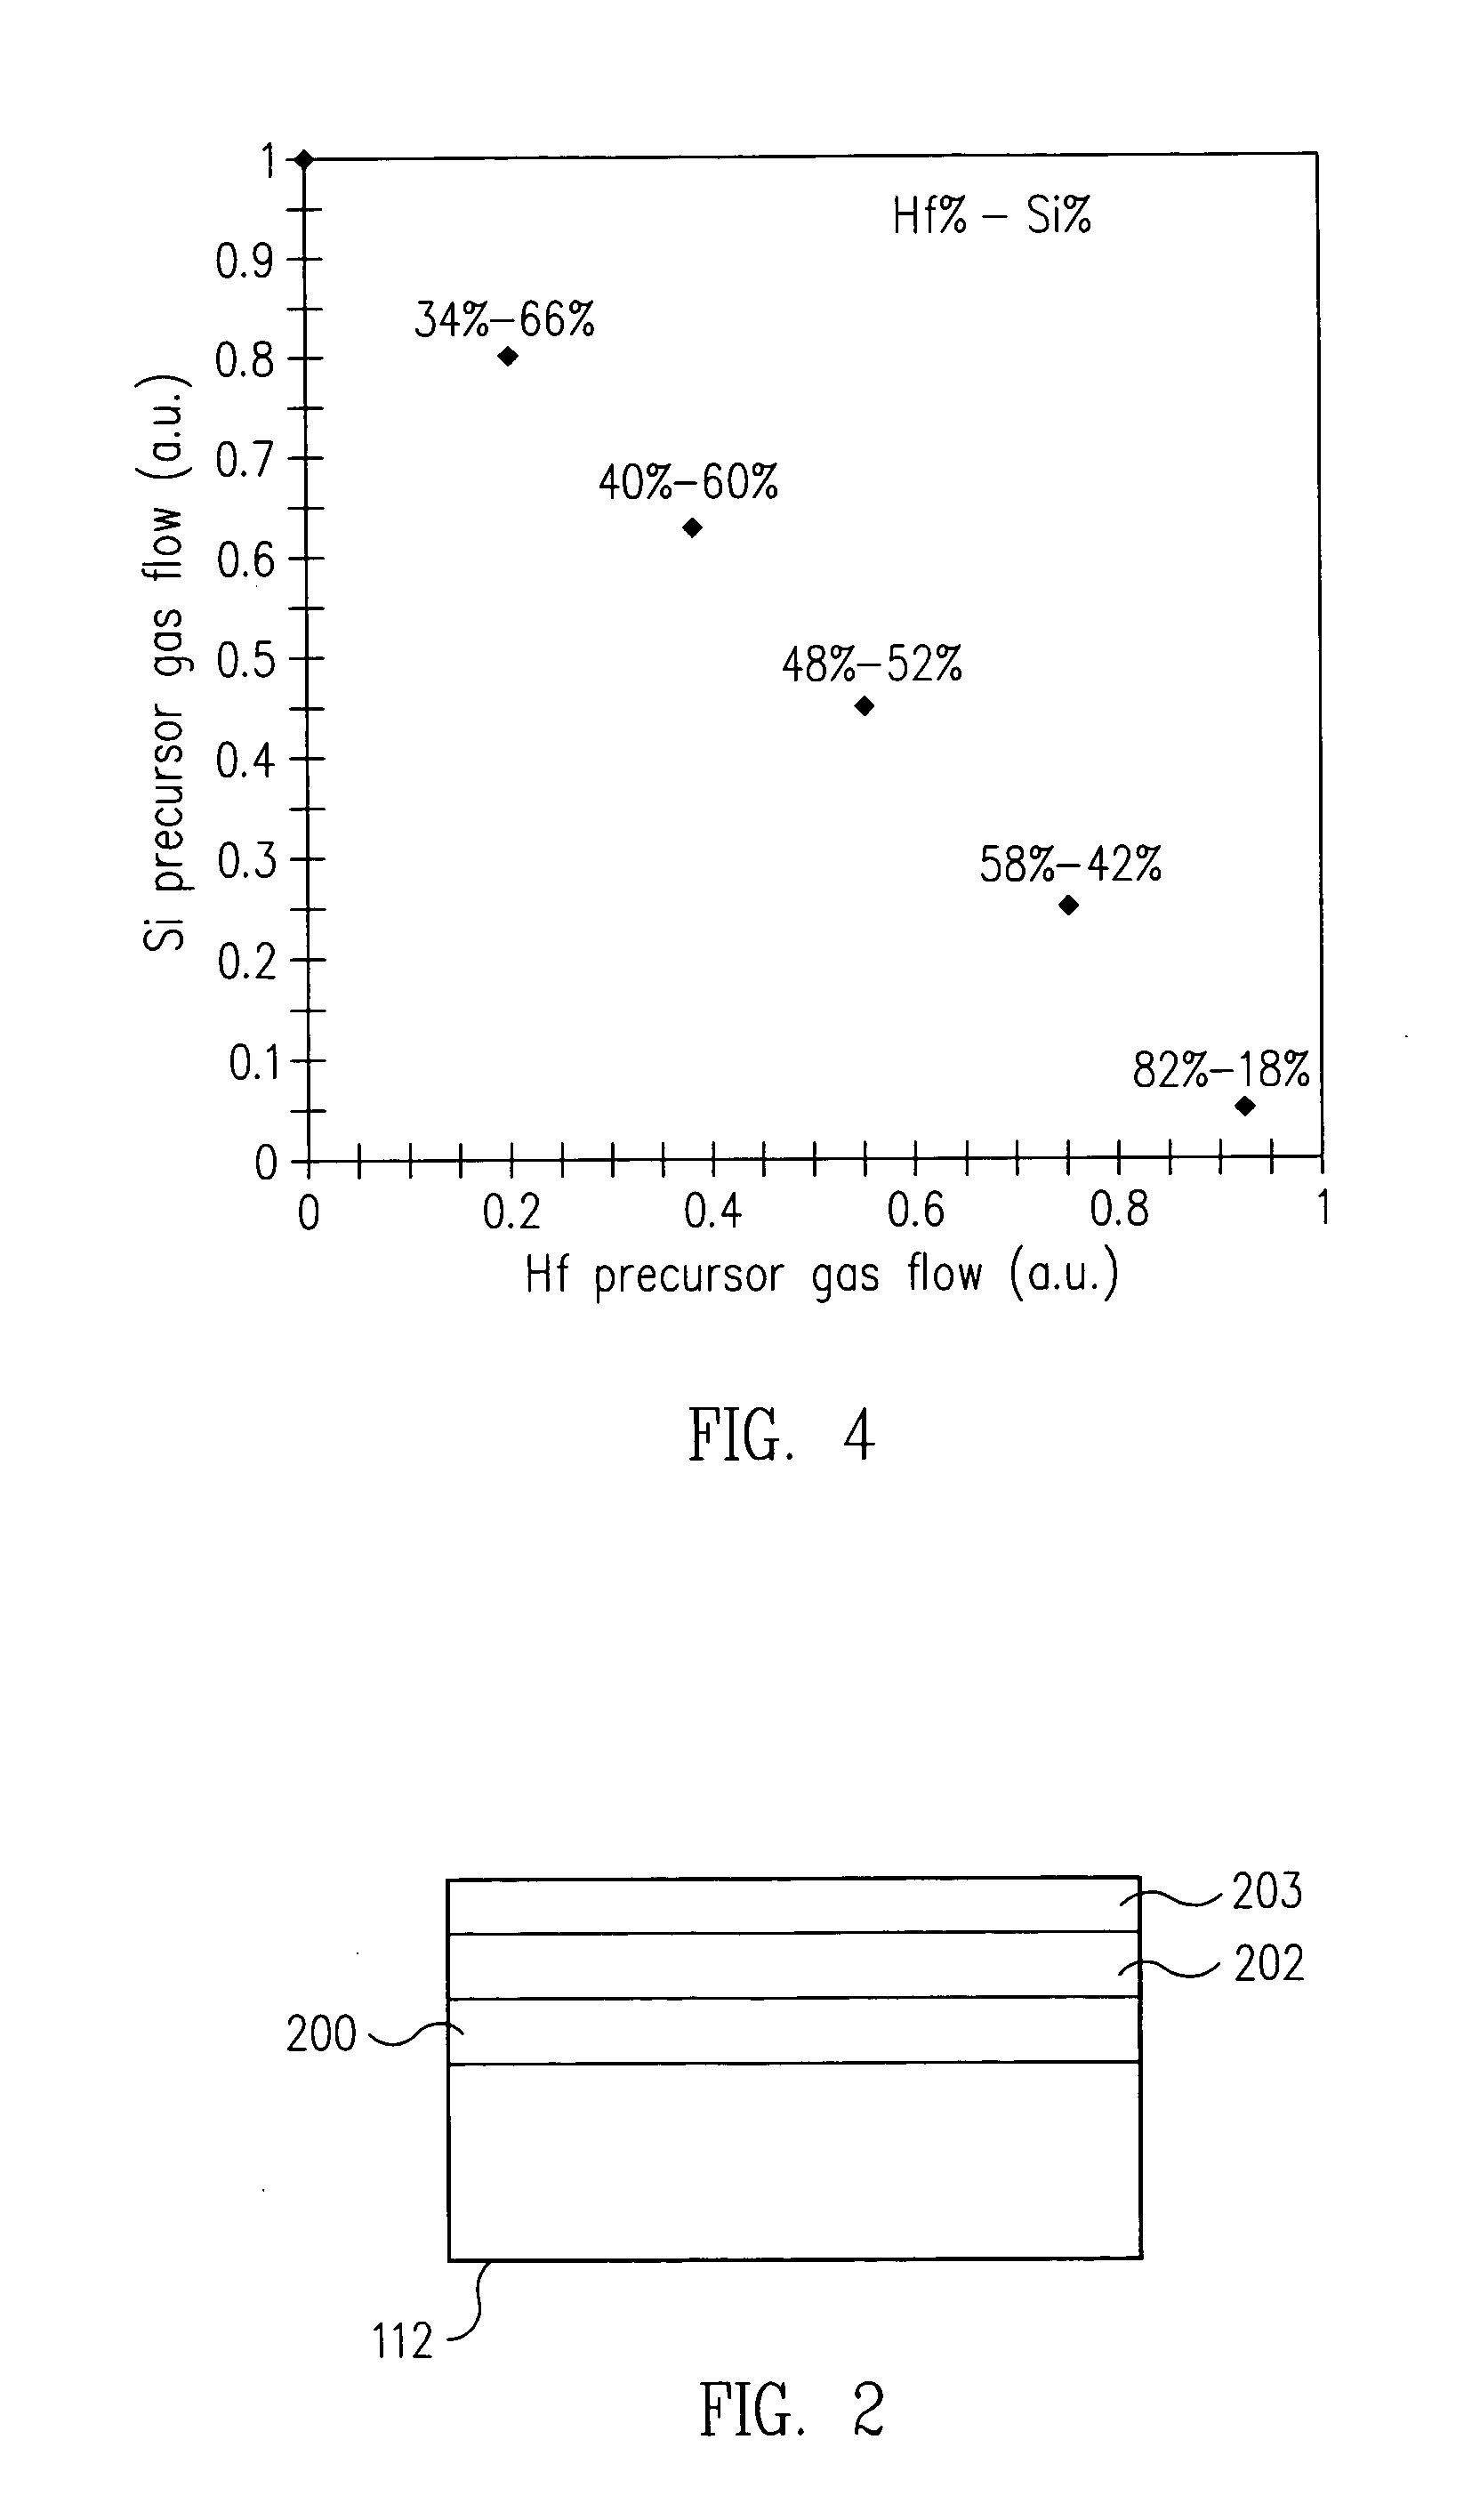 System and method for forming multi-component dielectric films